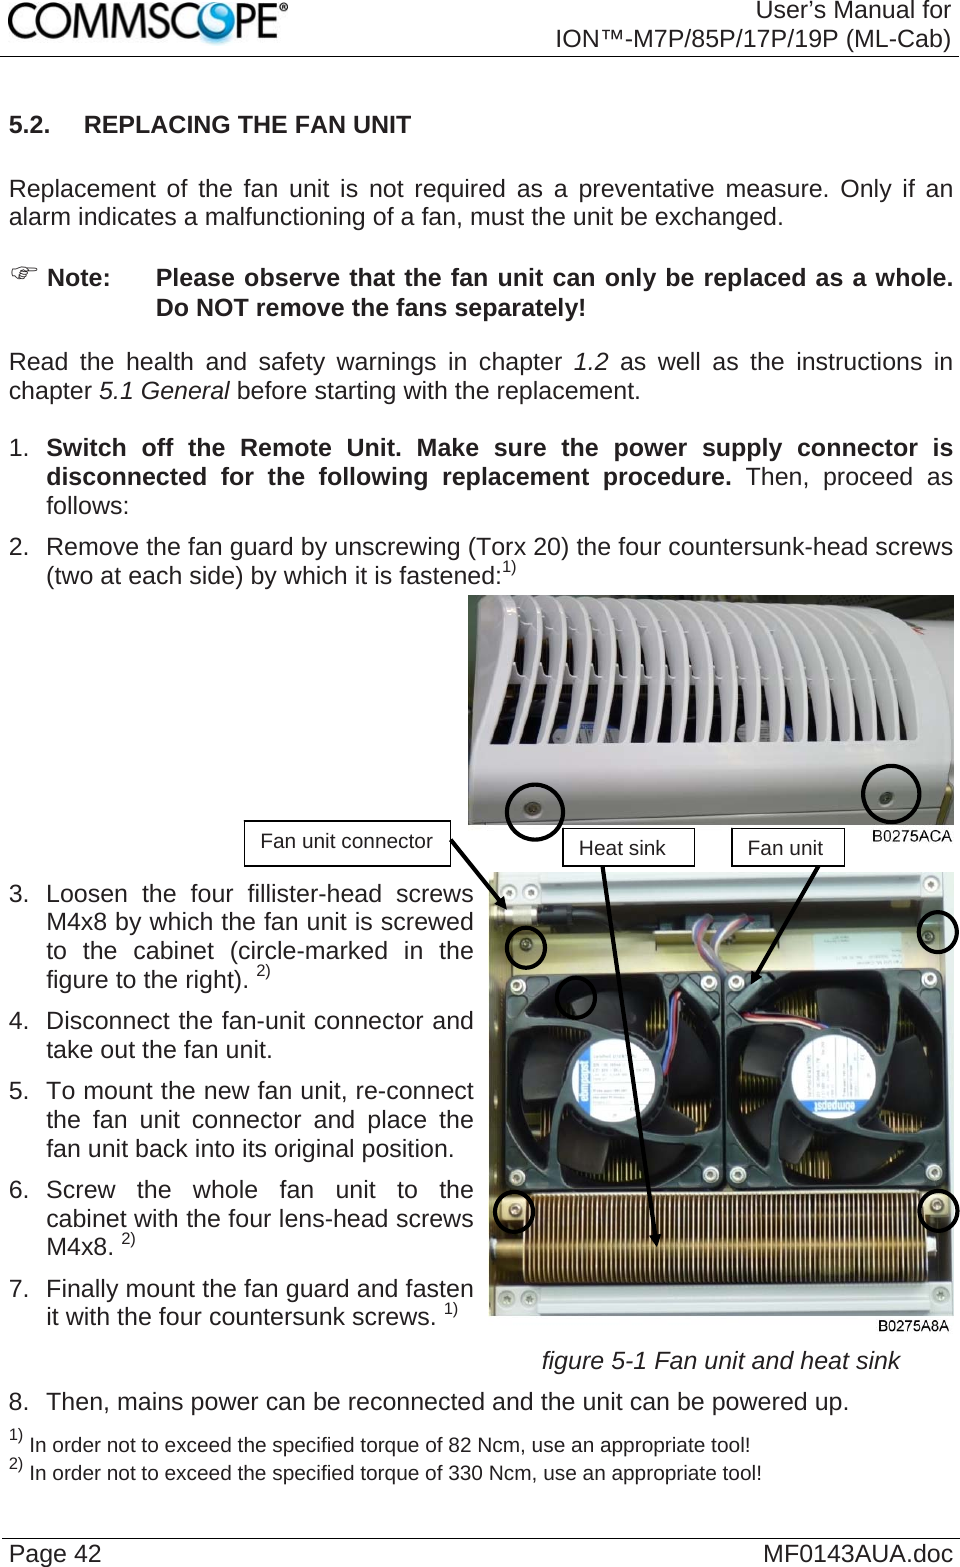  User’s Manual for ION™-M7P/85P/17P/19P (ML-Cab) Page 42  MF0143AUA.doc5.2.  REPLACING THE FAN UNIT  Replacement of the fan unit is not required as a preventative measure. Only if an alarm indicates a malfunctioning of a fan, must the unit be exchanged. ) Note:  Please observe that the fan unit can only be replaced as a whole. Do NOT remove the fans separately! Read the health and safety warnings in chapter 1.2 as well as the instructions in chapter 5.1 General before starting with the replacement.   1.  Switch off the Remote Unit. Make sure the power supply connector is disconnected for the following replacement procedure. Then, proceed as follows: 2.  Remove the fan guard by unscrewing (Torx 20) the four countersunk-head screws (two at each side) by which it is fastened:1)    3. Loosen the four fillister-head screws M4x8 by which the fan unit is screwed to the cabinet (circle-marked in the figure to the right). 2) 4.  Disconnect the fan-unit connector and take out the fan unit. 5.  To mount the new fan unit, re-connectthe fan unit connector and place the fan unit back into its original position. 6. Screw the whole fan unit to the cabinet with the four lens-head screws M4x8. 2) 7.  Finally mount the fan guard and fasten it with the four countersunk screws. 1) figure 5-1 Fan unit and heat sink 8.  Then, mains power can be reconnected and the unit can be powered up. 1) In order not to exceed the specified torque of 82 Ncm, use an appropriate tool! 2) In order not to exceed the specified torque of 330 Ncm, use an appropriate tool! Fan unit connector  Heat sink Fan unit  